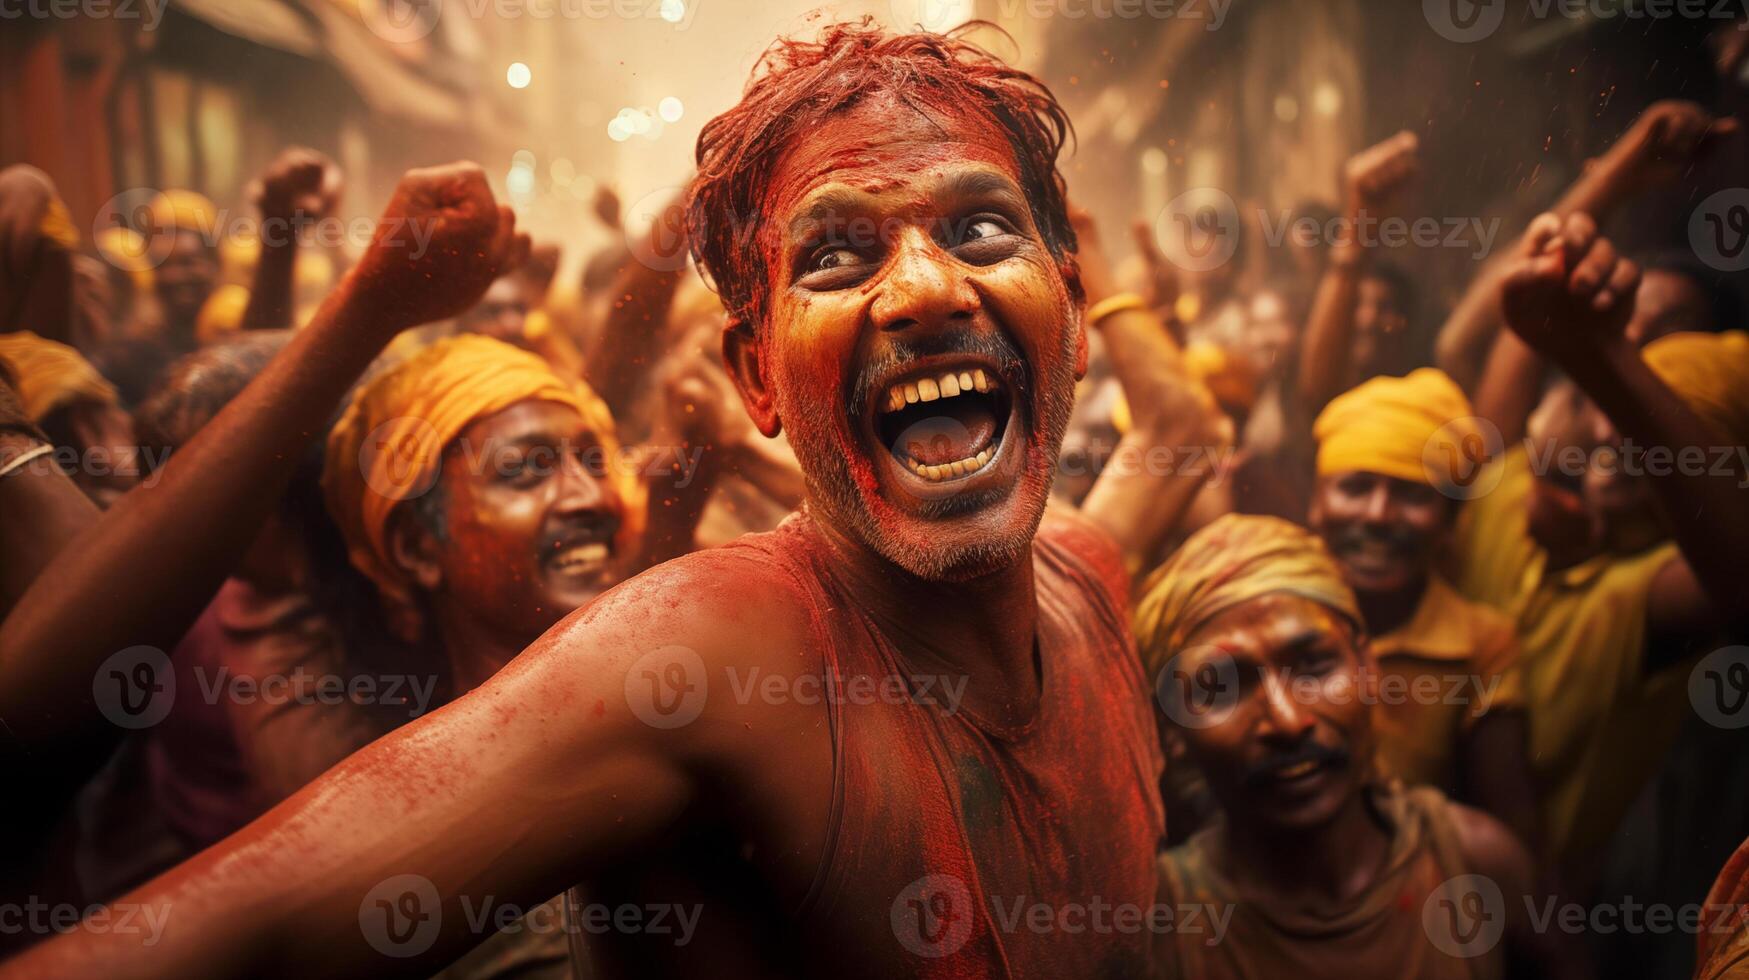 AI generated indian celebrate holy, shoot from back, happy and festive mood photo